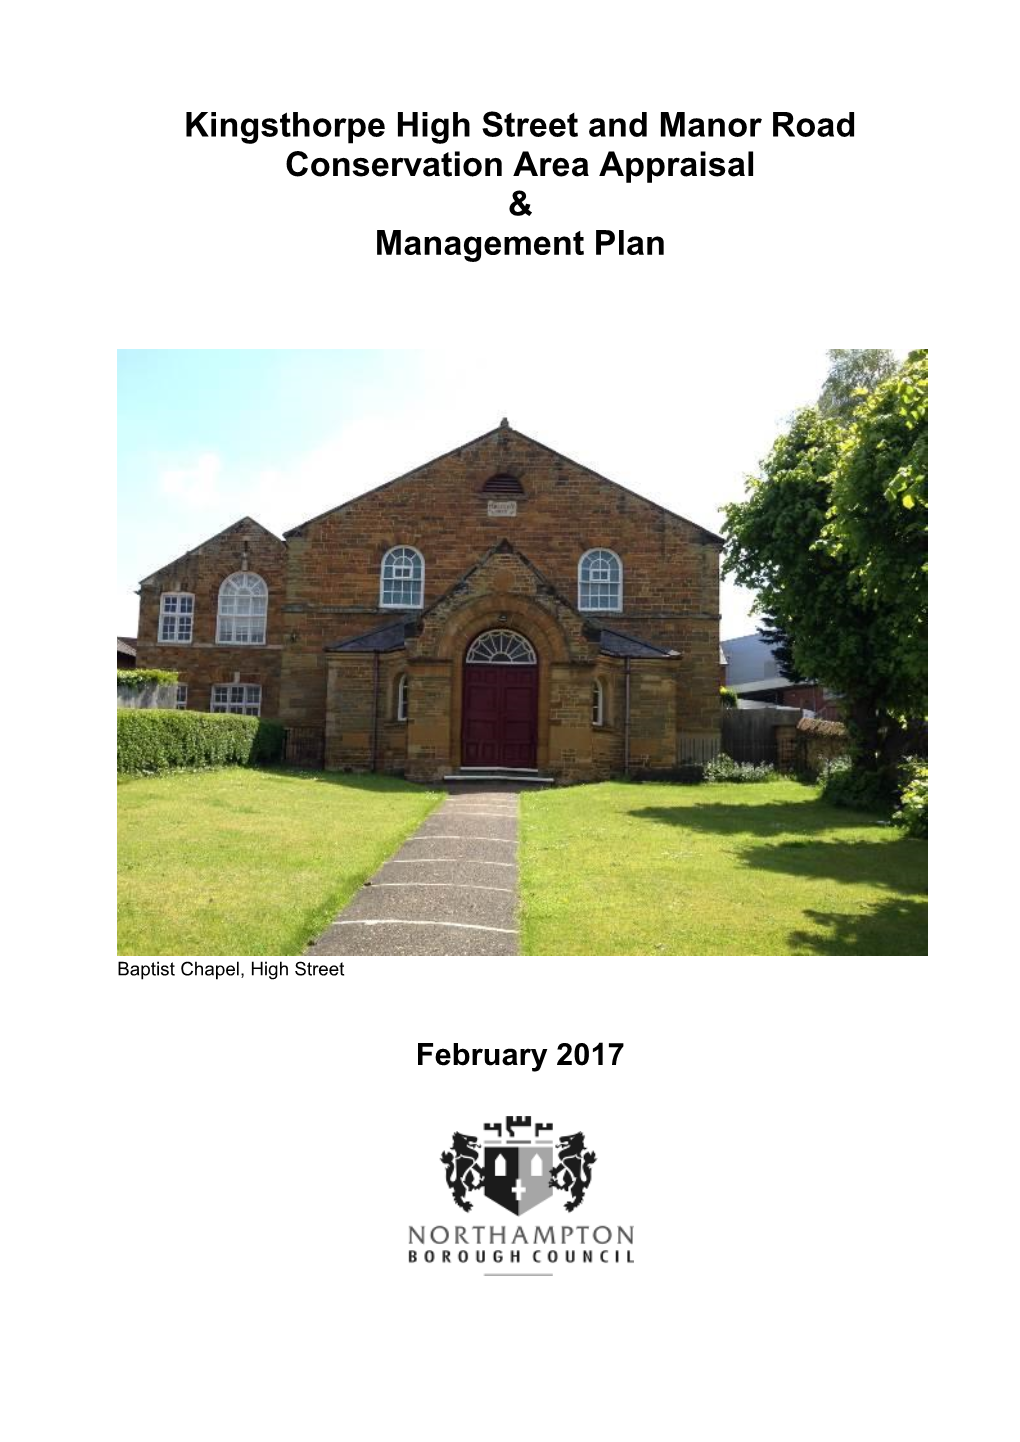 Kingsthorpe High Street and Manor Road Conservation Area Appraisal & Management Plan